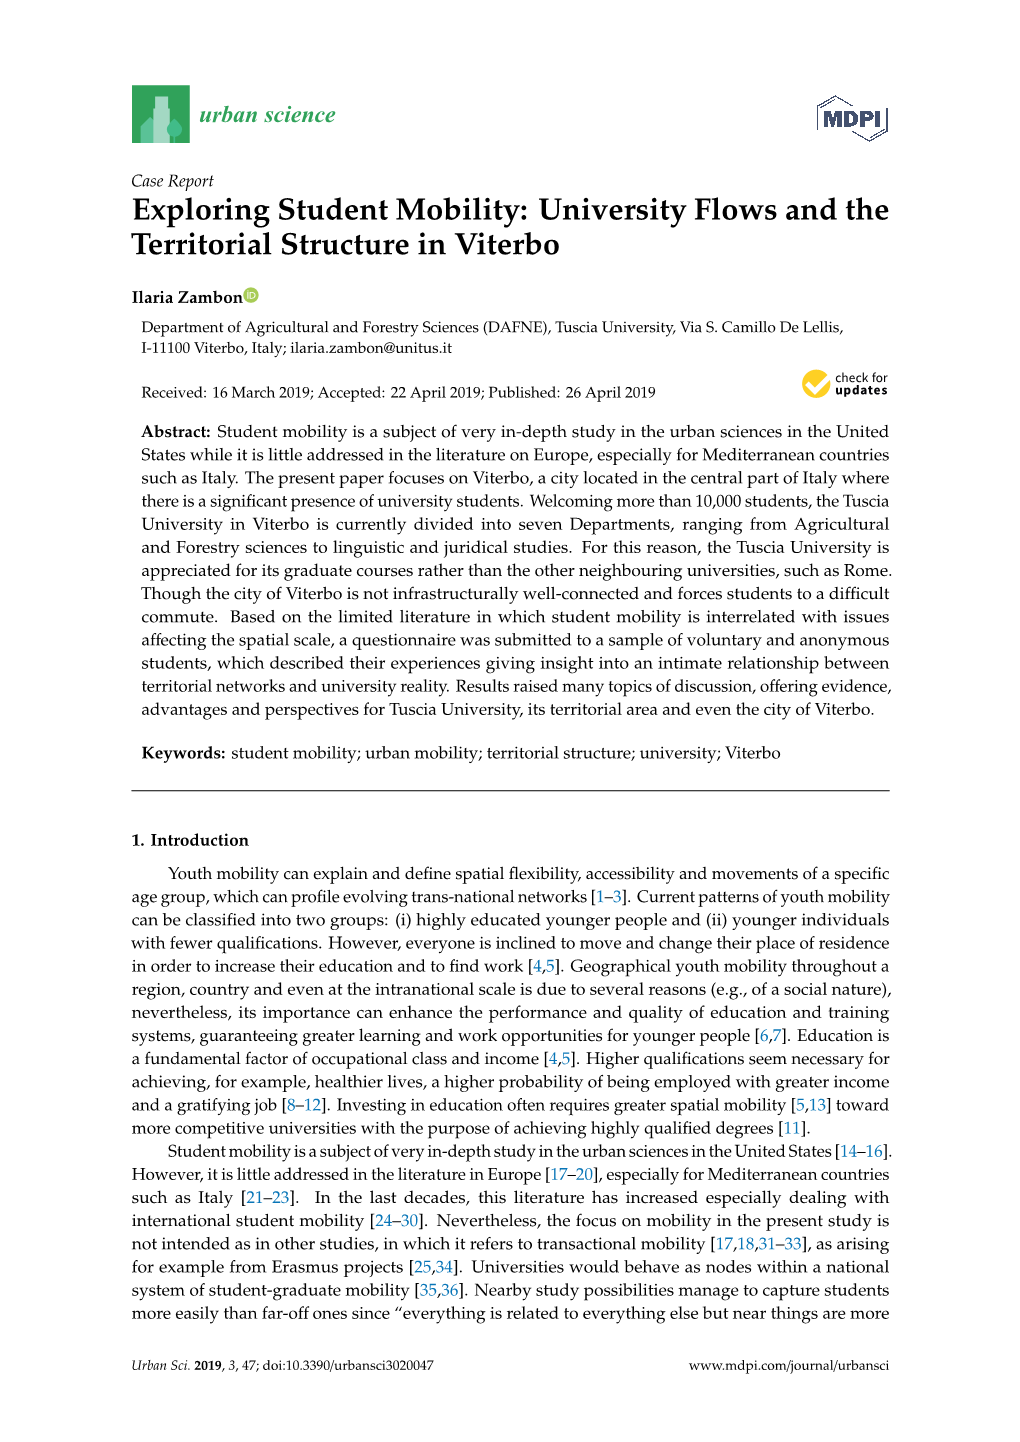 Exploring Student Mobility: University Flows and the Territorial Structure in Viterbo